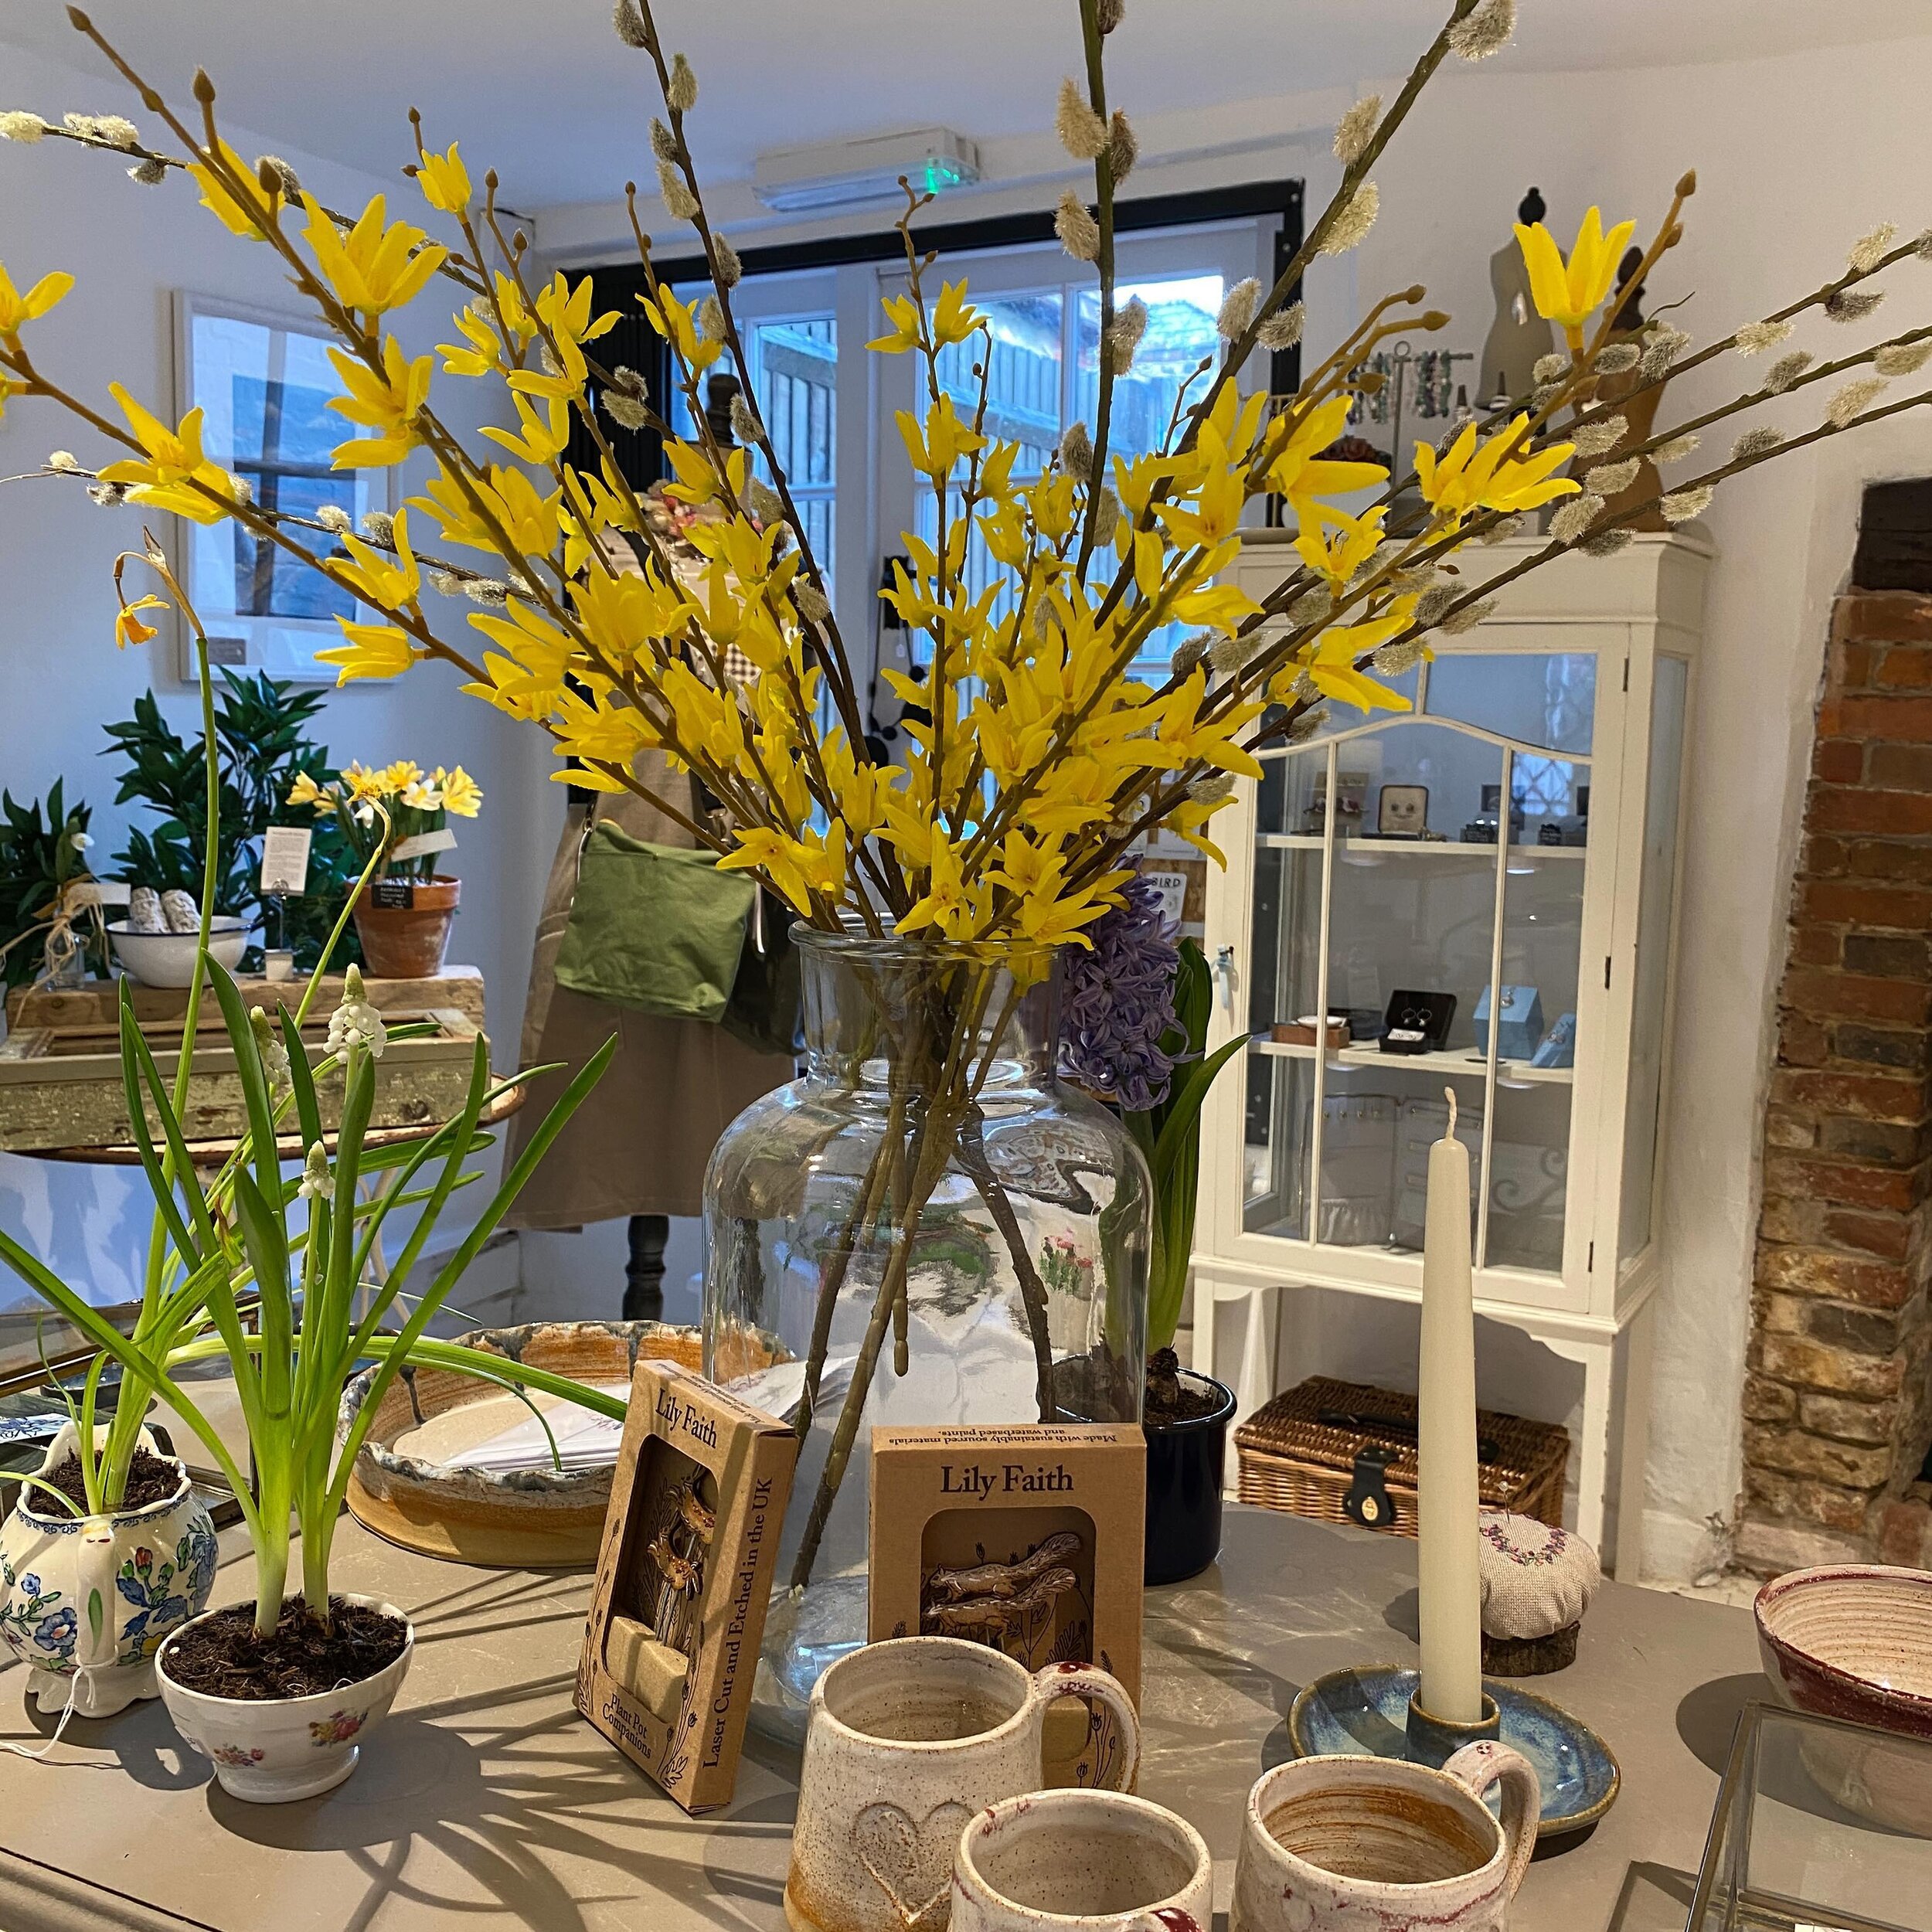 Spring has well and truly arrived with a riot of daffodils and forsythia in both shops - just in time for Mother&rsquo;s Day this coming Sunday, 10 March. If you&rsquo;re looking for a unique handmade gift to say thank you to the incredible women in 